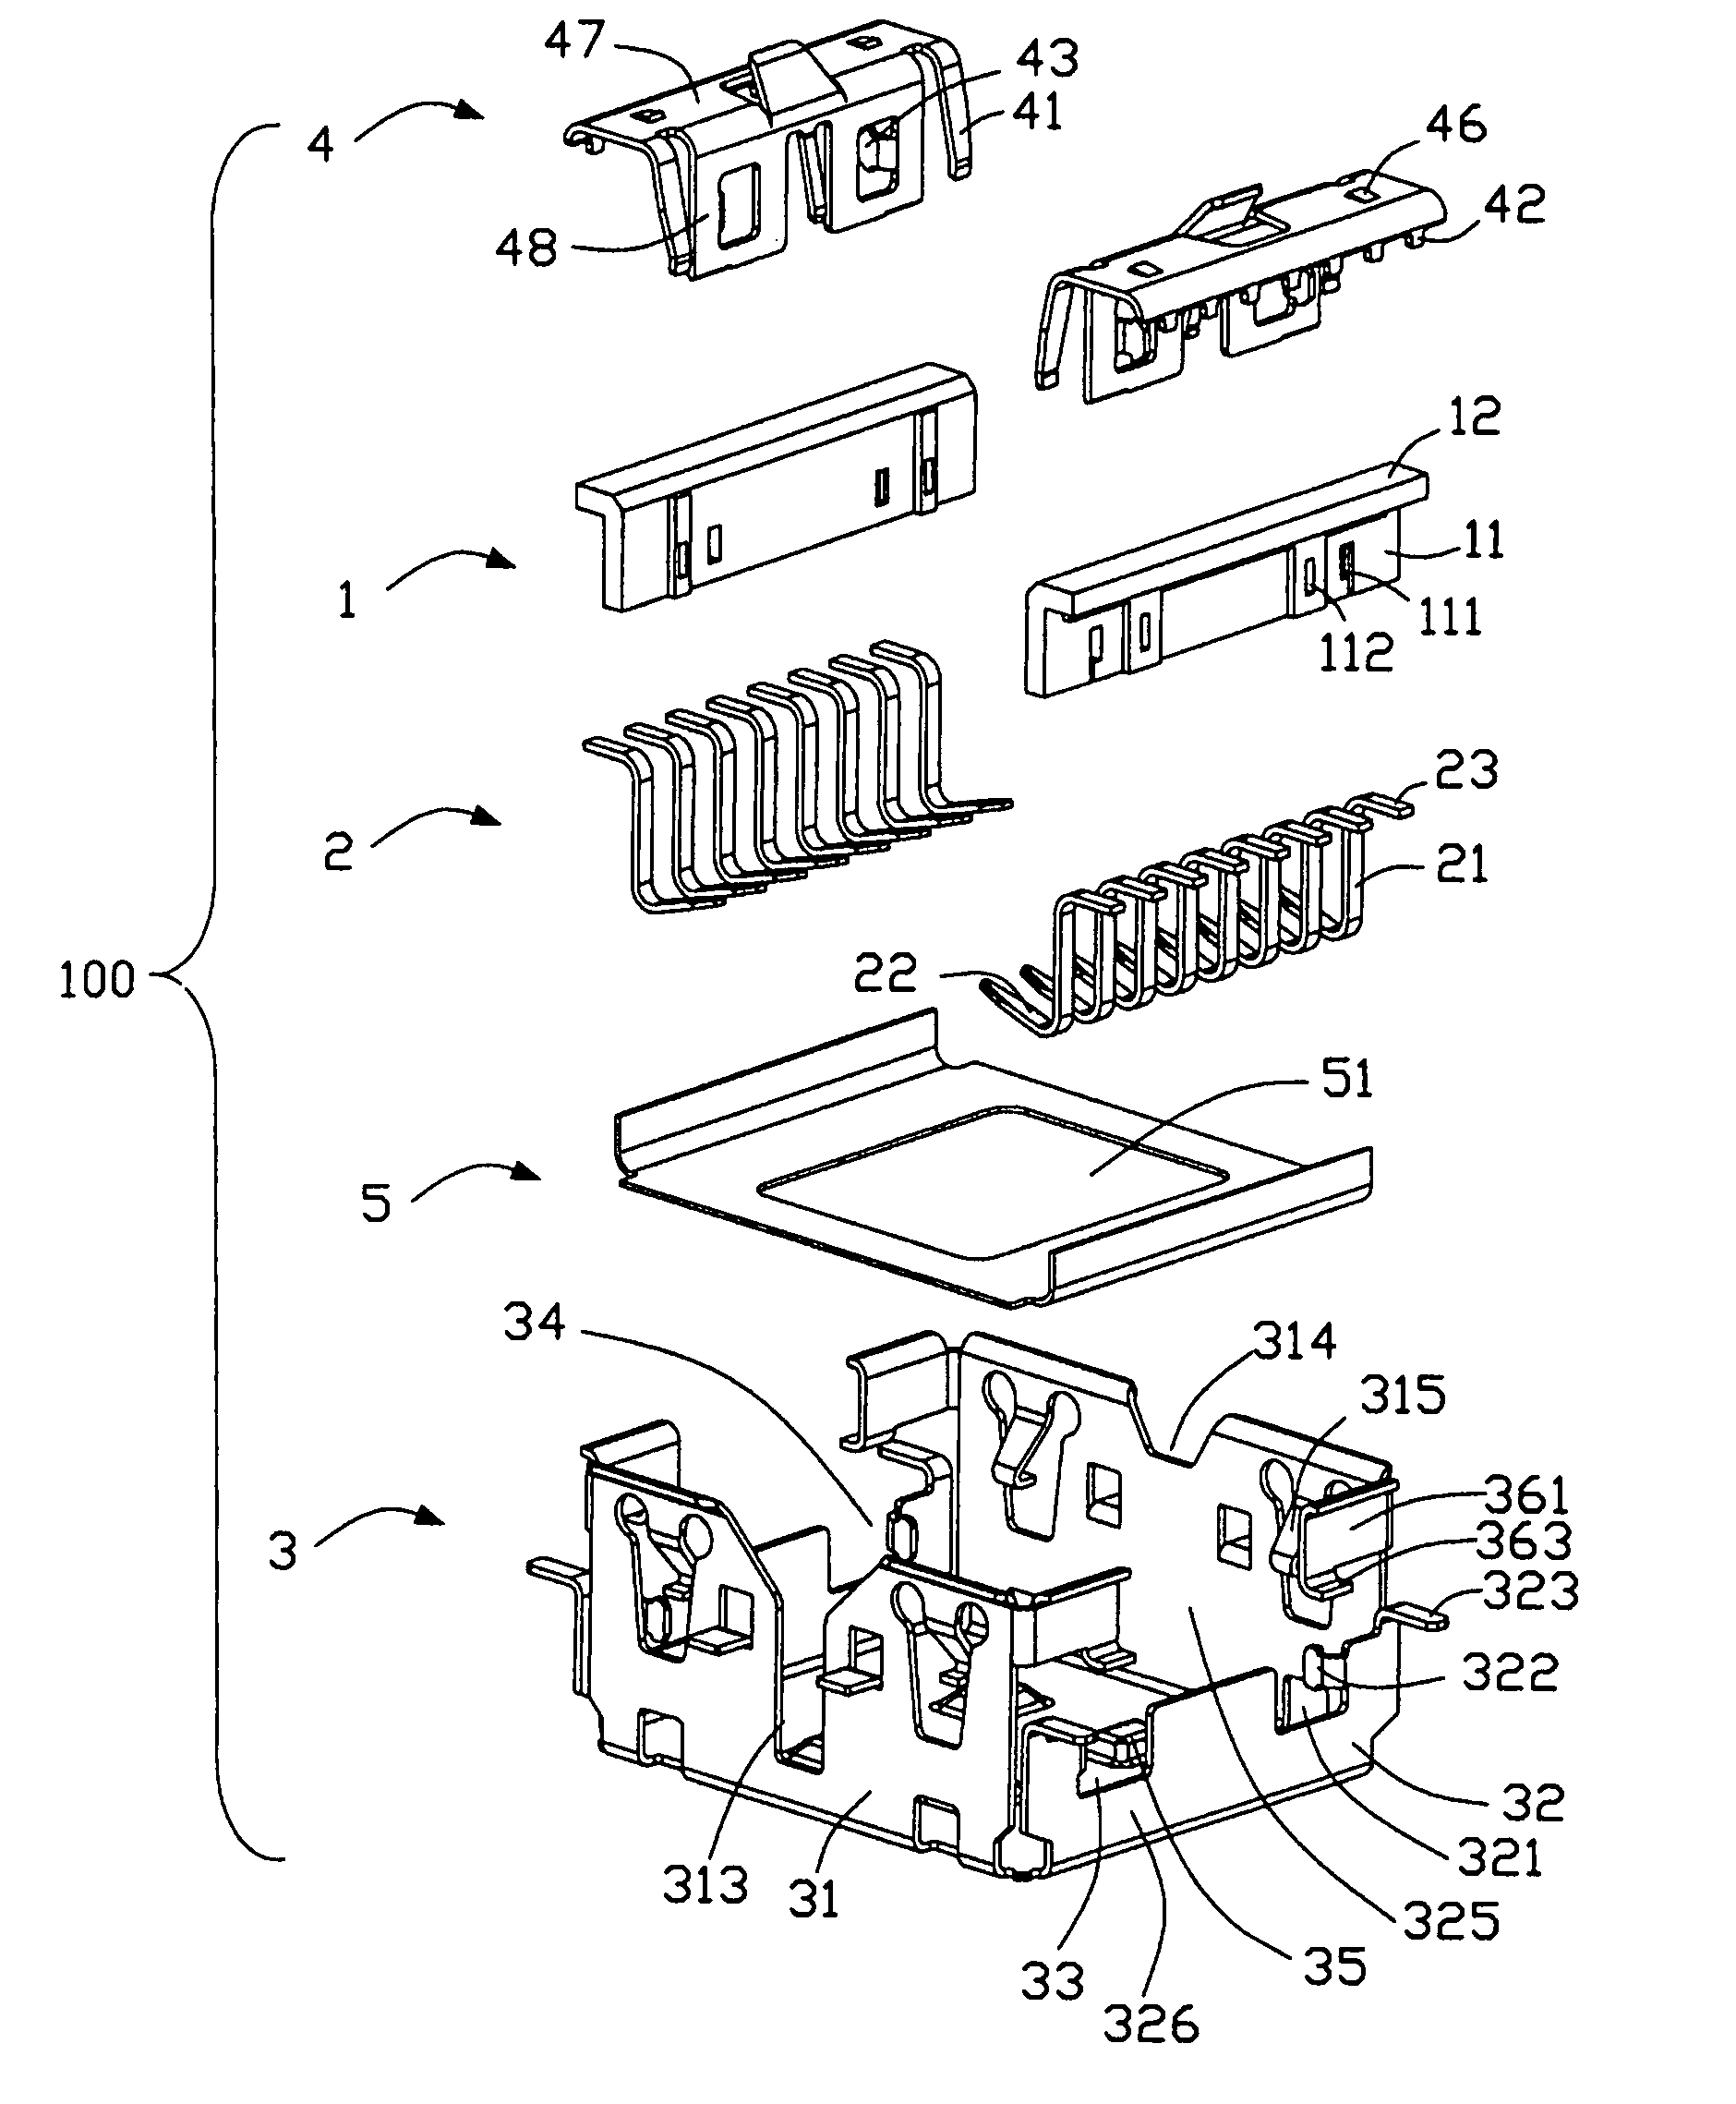 Electrical connector having improved shield